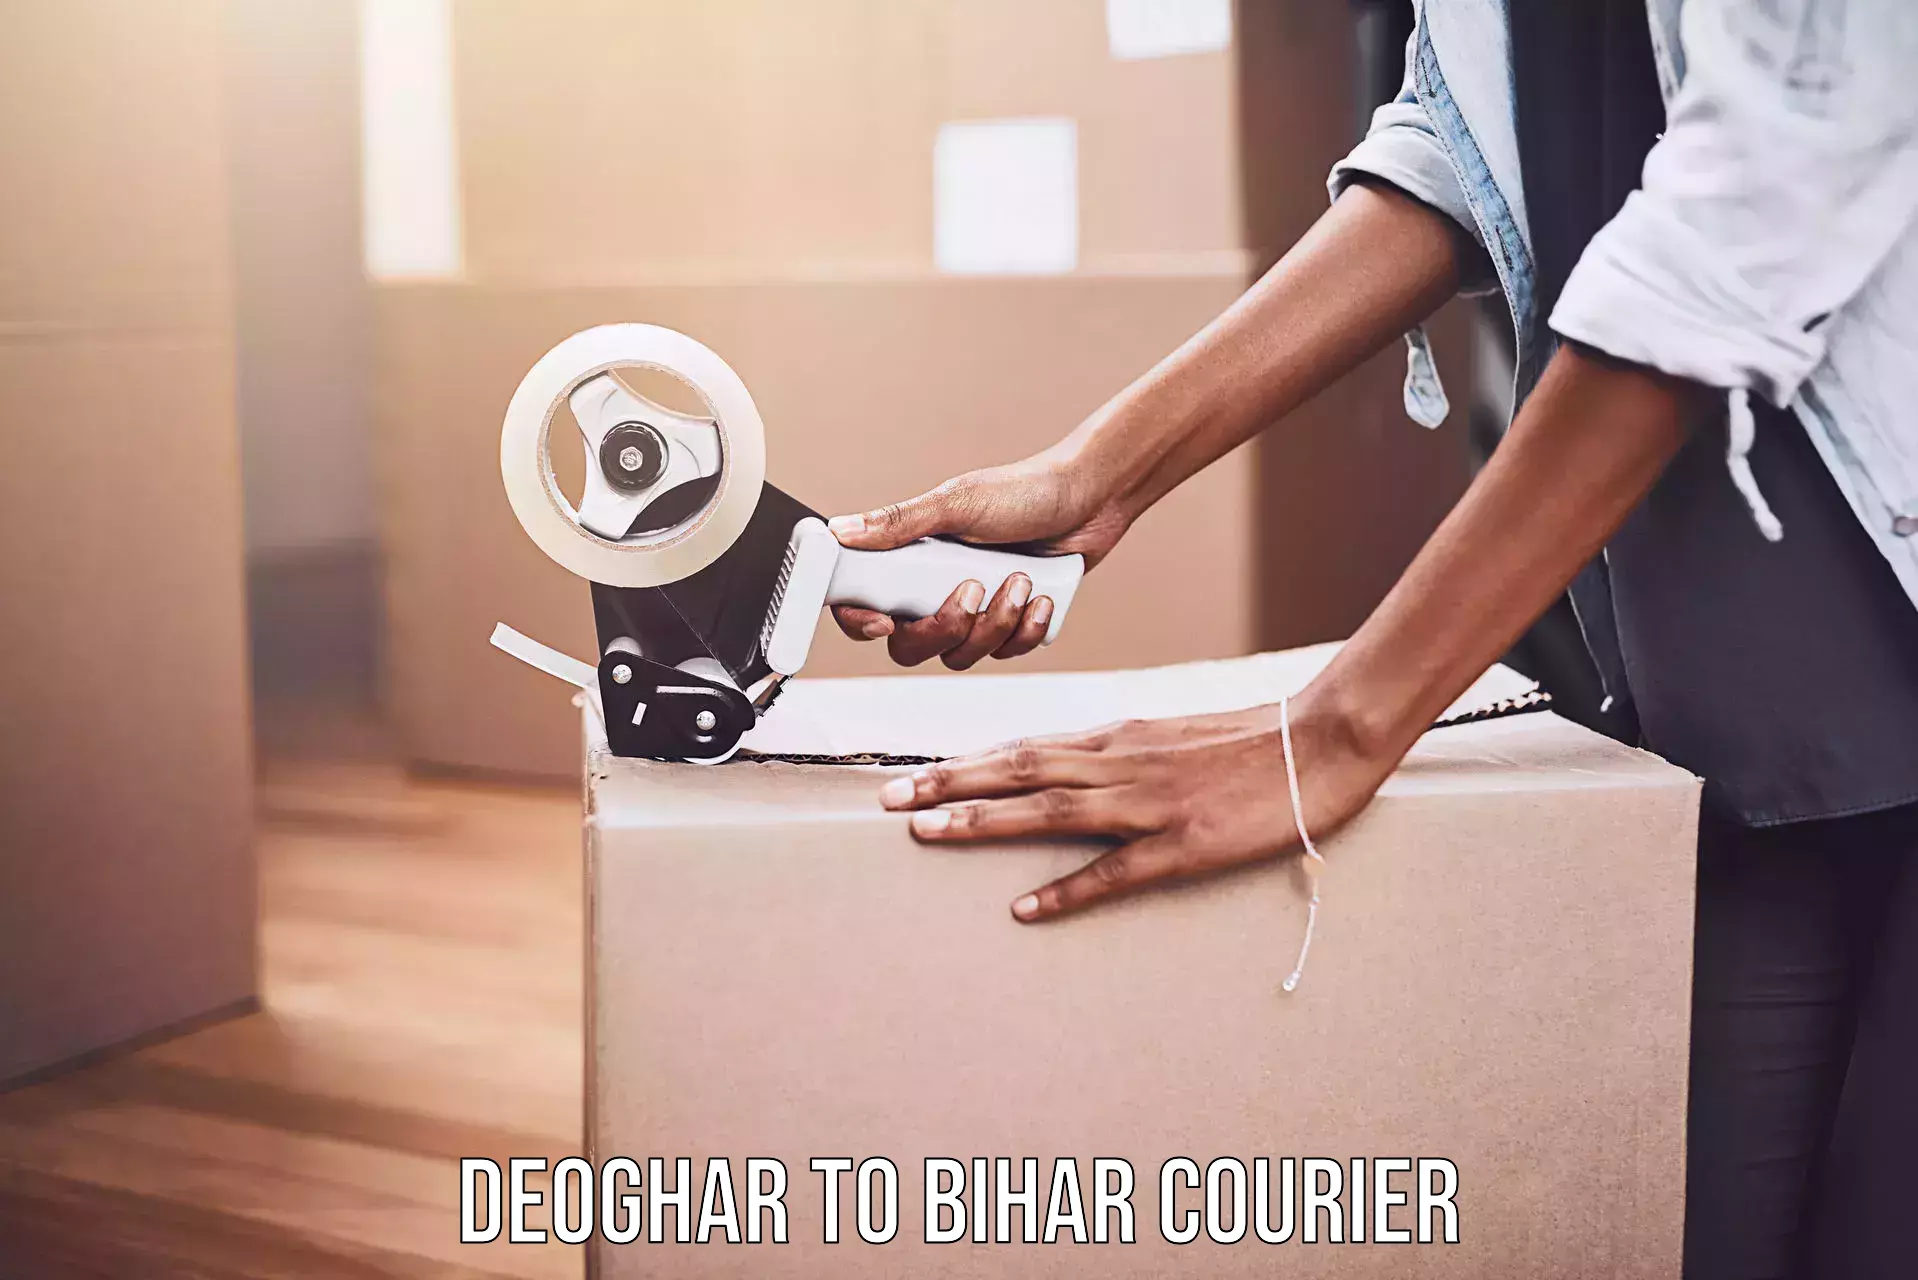 Automated parcel services Deoghar to Darbhanga